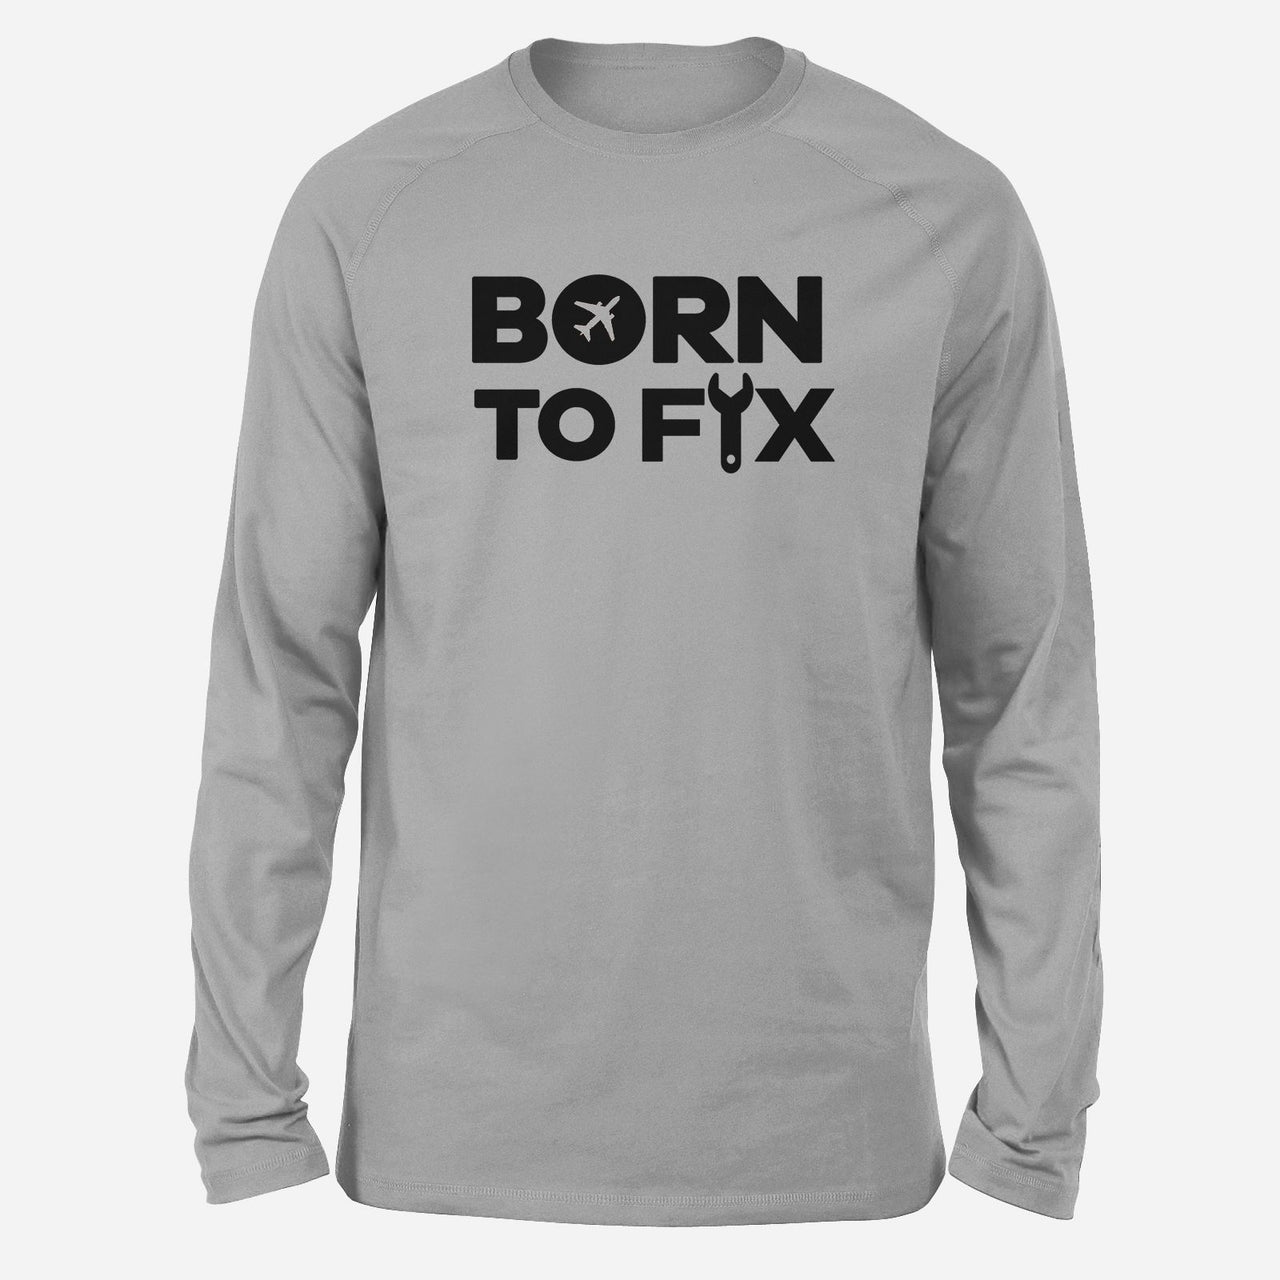 Born To Fix Airplanes Designed Long-Sleeve T-Shirts